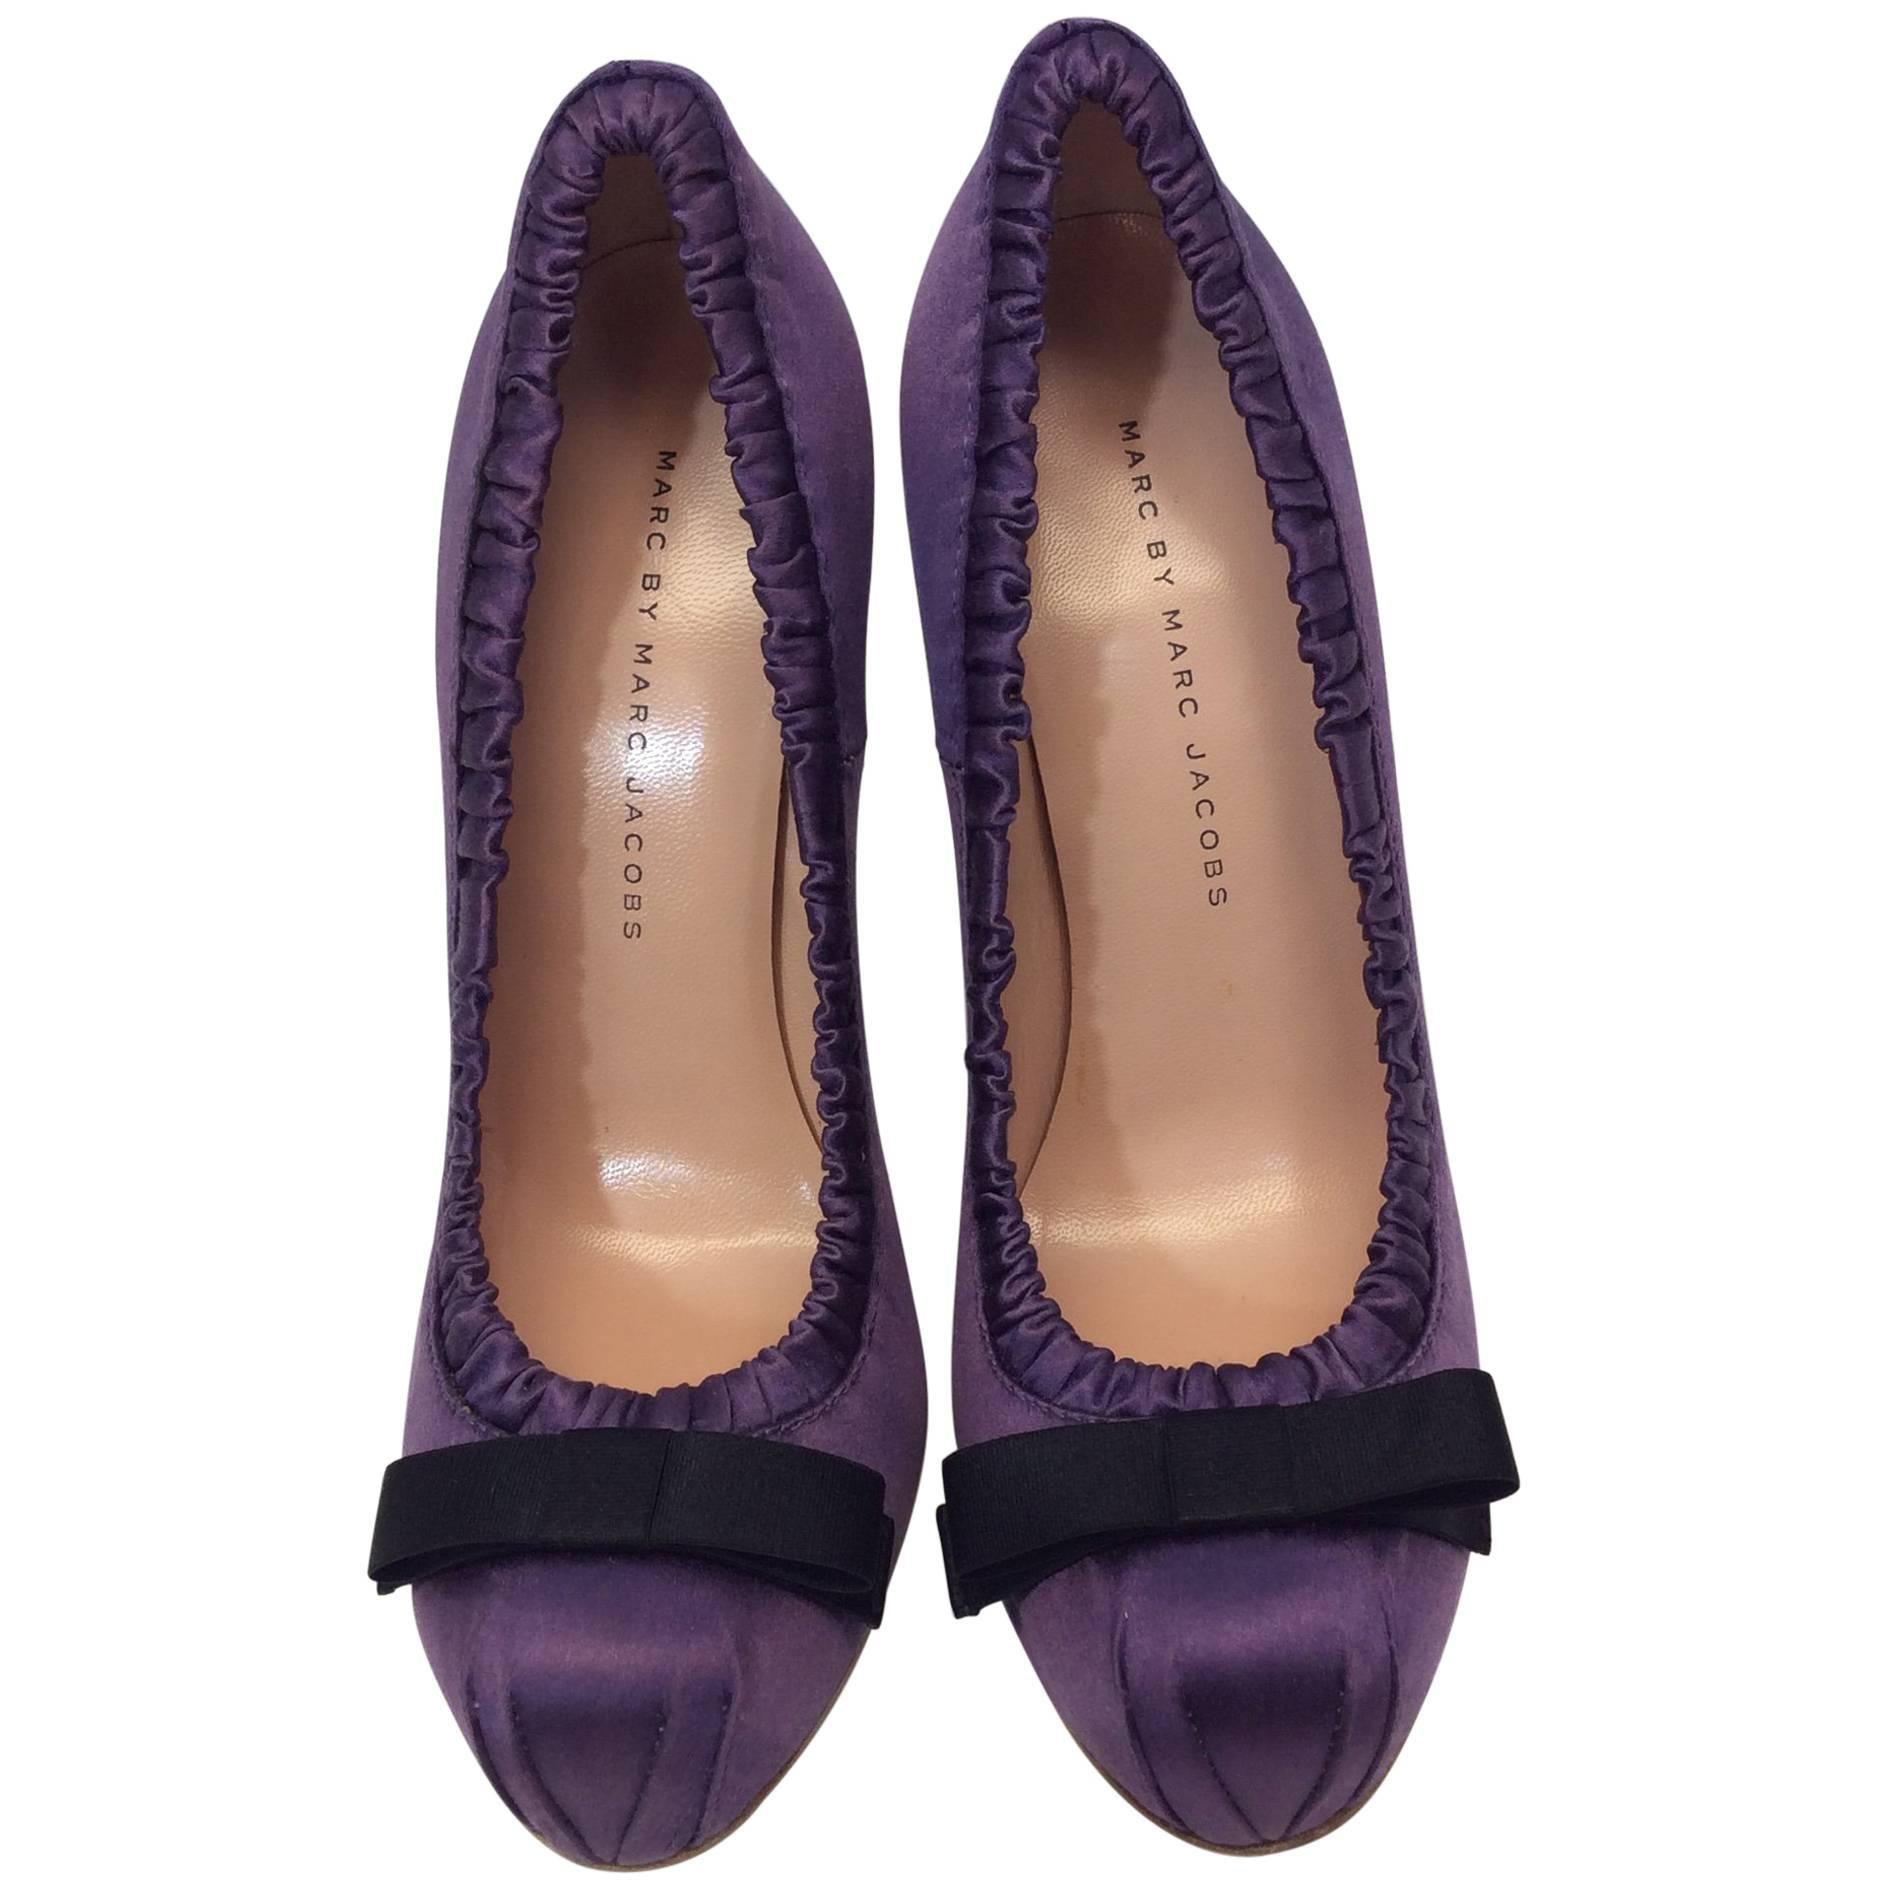 Marc by Marc Jacobs Purple Satin Pumps with Black Bow Detail For Sale